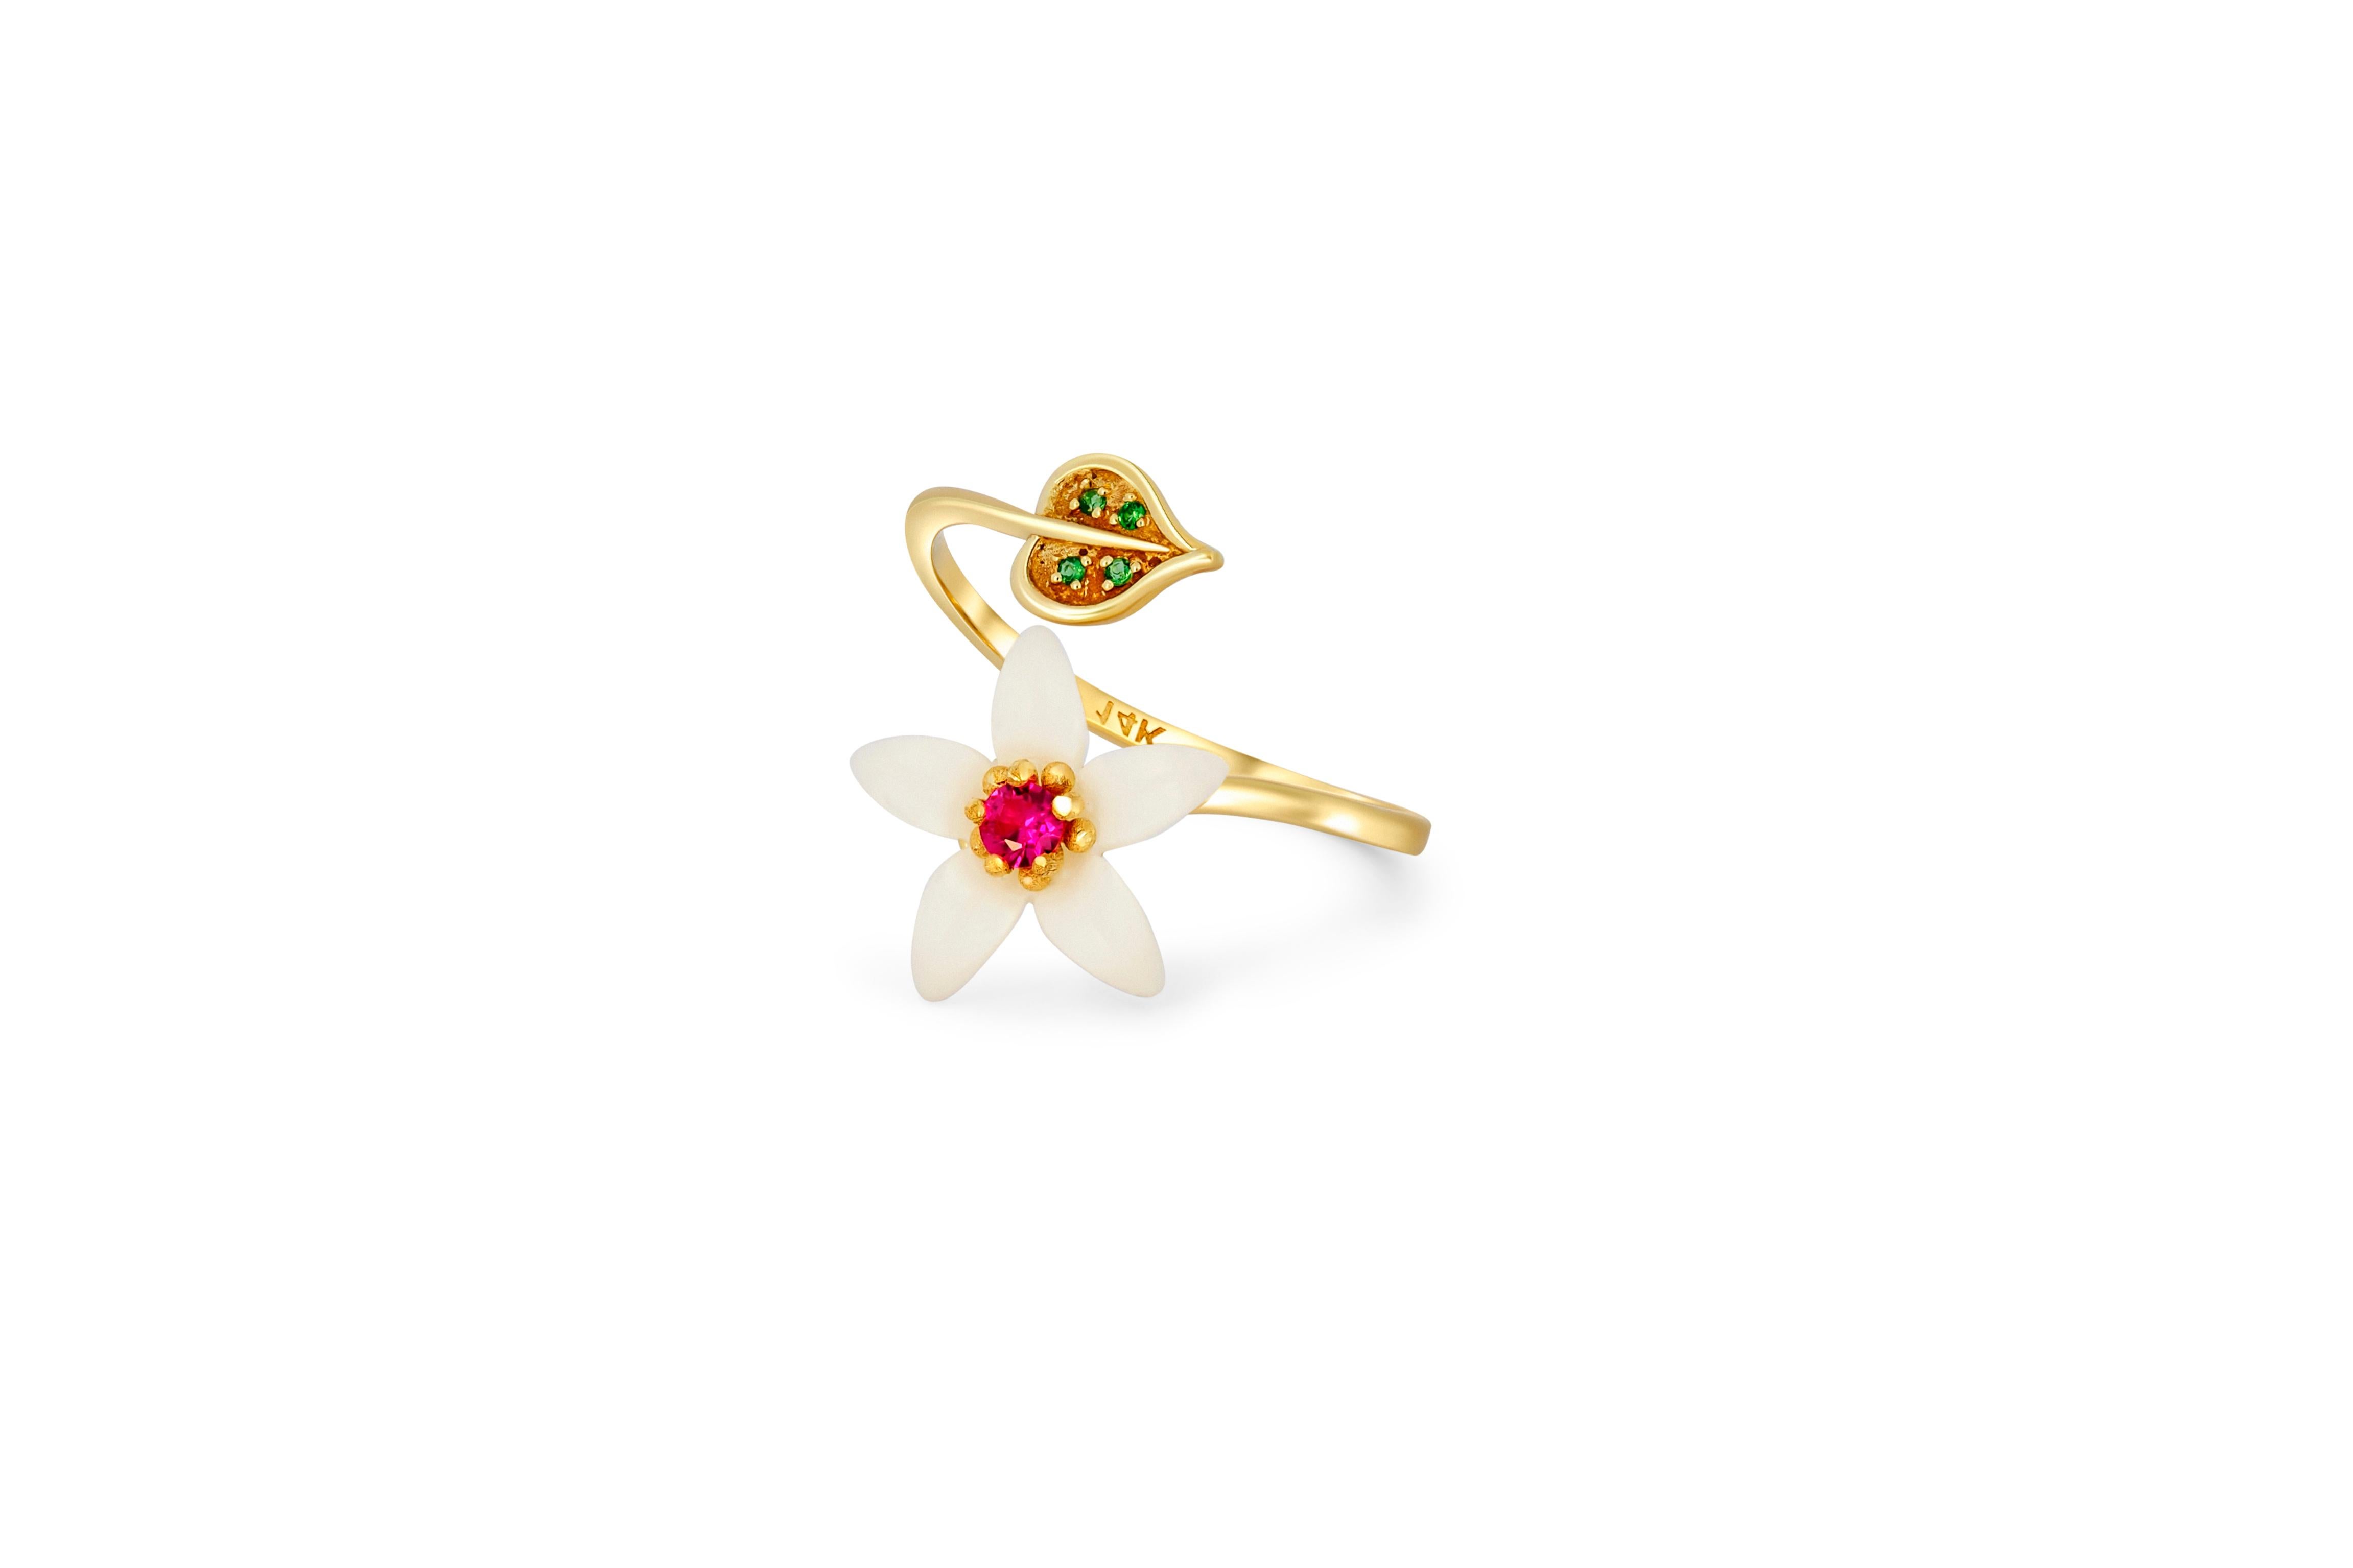 Carved Flower 14k ring with gemstones.
Open ended Lab ruby ring in 14k gold. Adjustable ring. Carved mother of pearl flower ring. Flower gold ring. Round ruby vintage ring. Nature inspired ring with mother of pearl flower. Shell flower ring.

Metal: